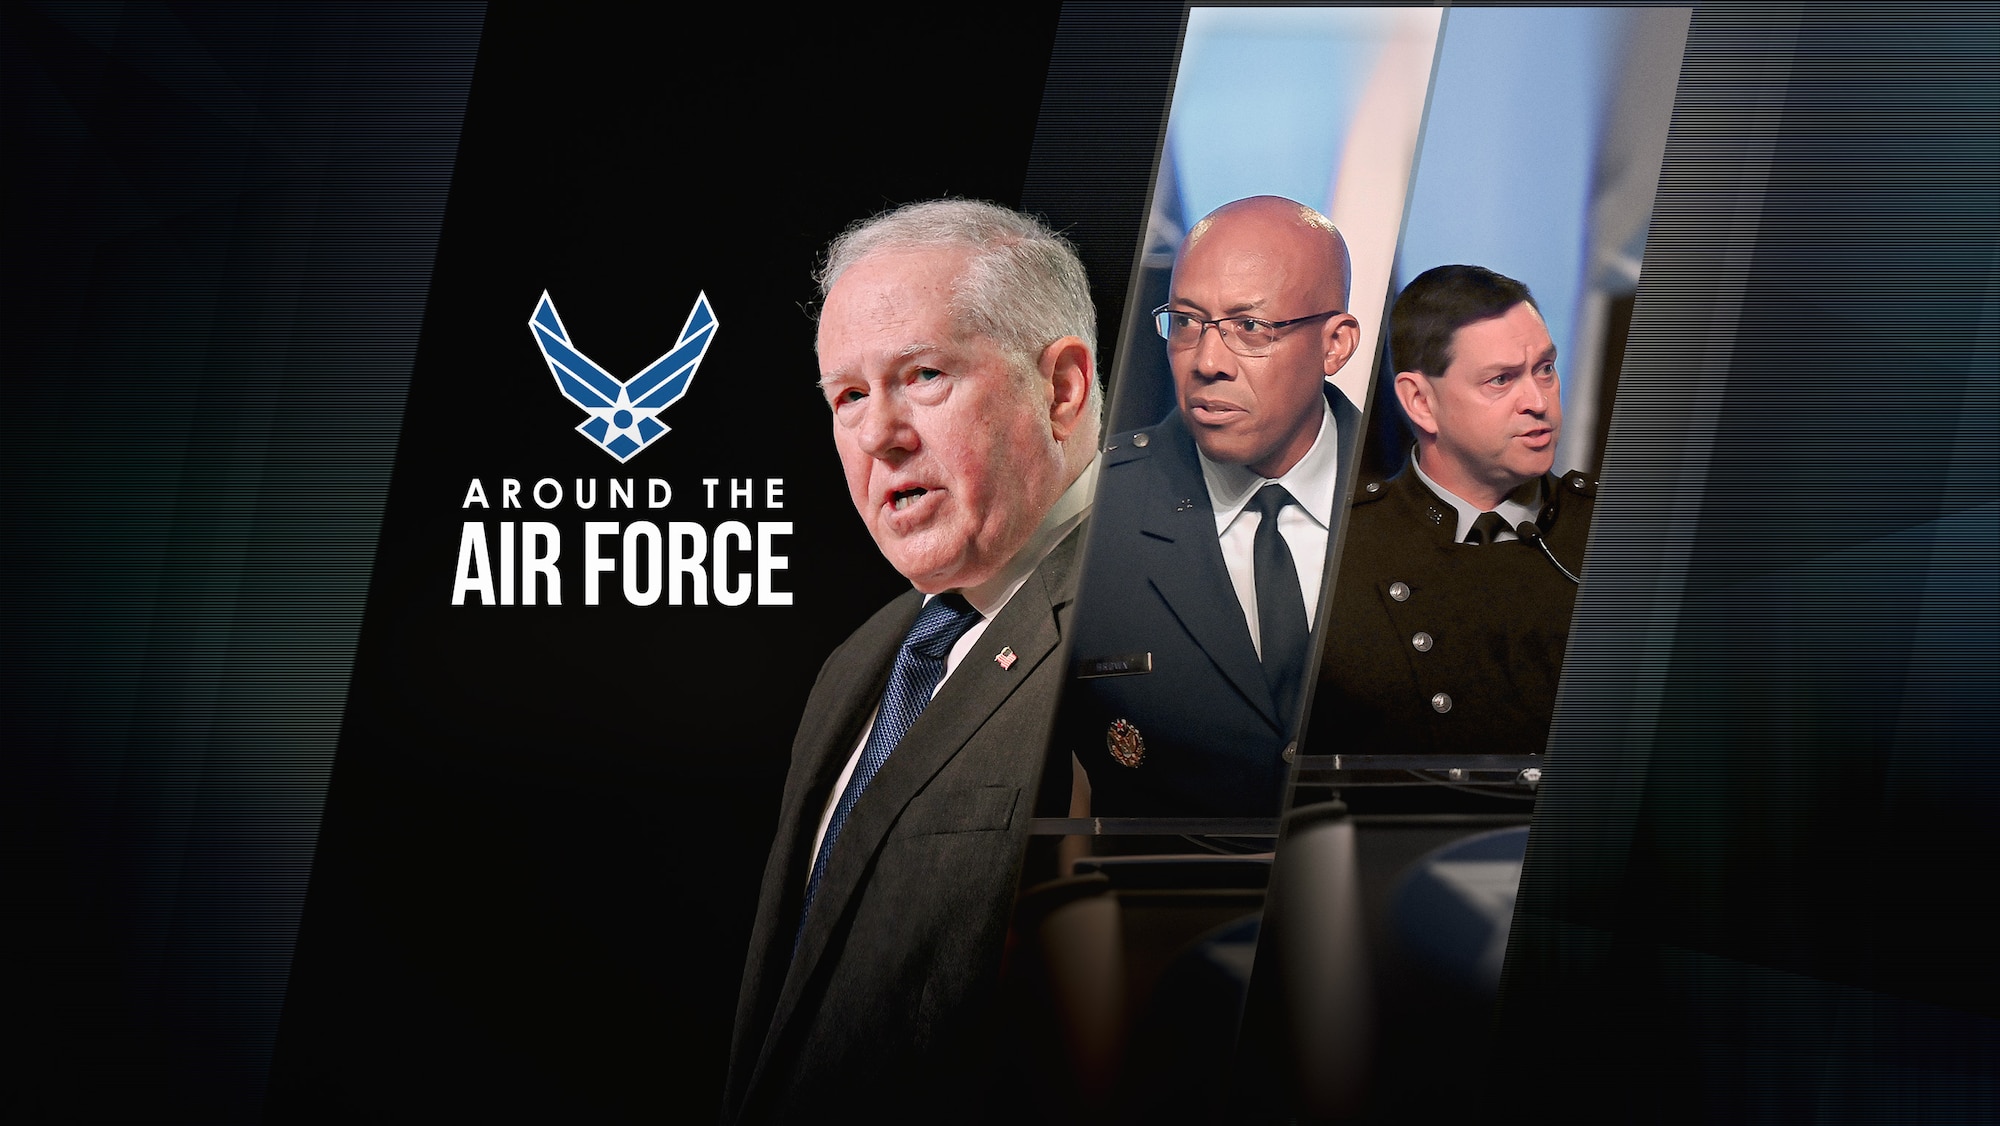 In this week’s look around the Air Force, leaders talk about how the department is changing in light of great power competition in their keynote speeches at the Air and Space Forces Association’s Air, Space and Cyber Conference at National Harbor, Maryland. (Hosted by Senior Airman Saomy Sabournin)